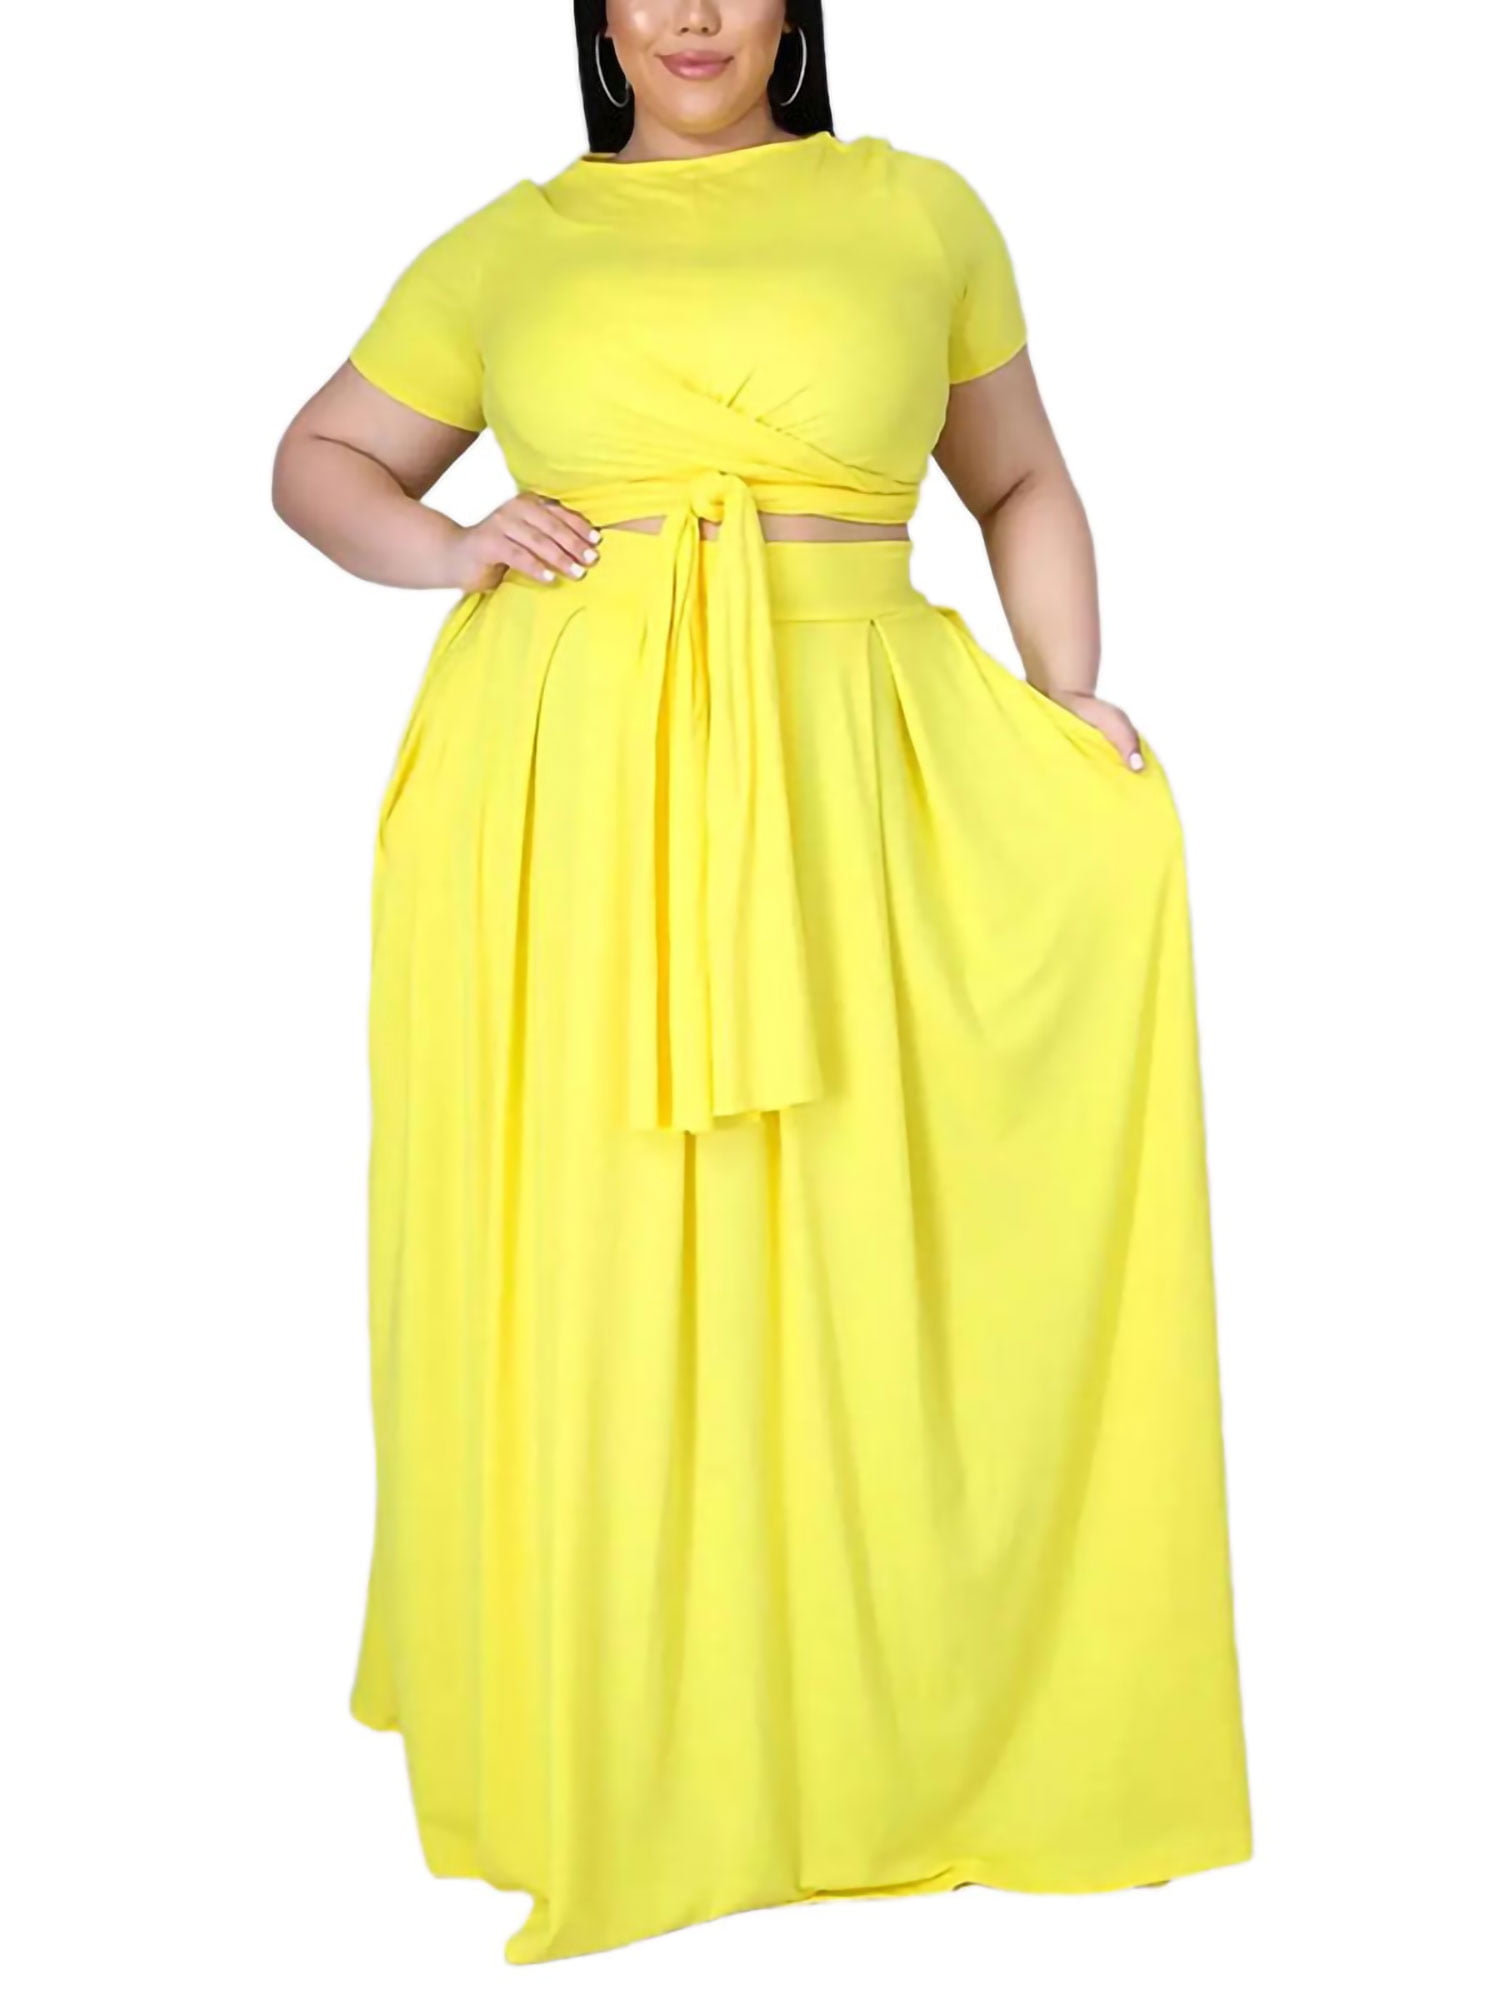 MAWCLOS Womens Plus Size 2 Piece Outfits Summer Solid Color Short Sleeve  Tops and Long Skirts Casual Sets for Beach Vacation